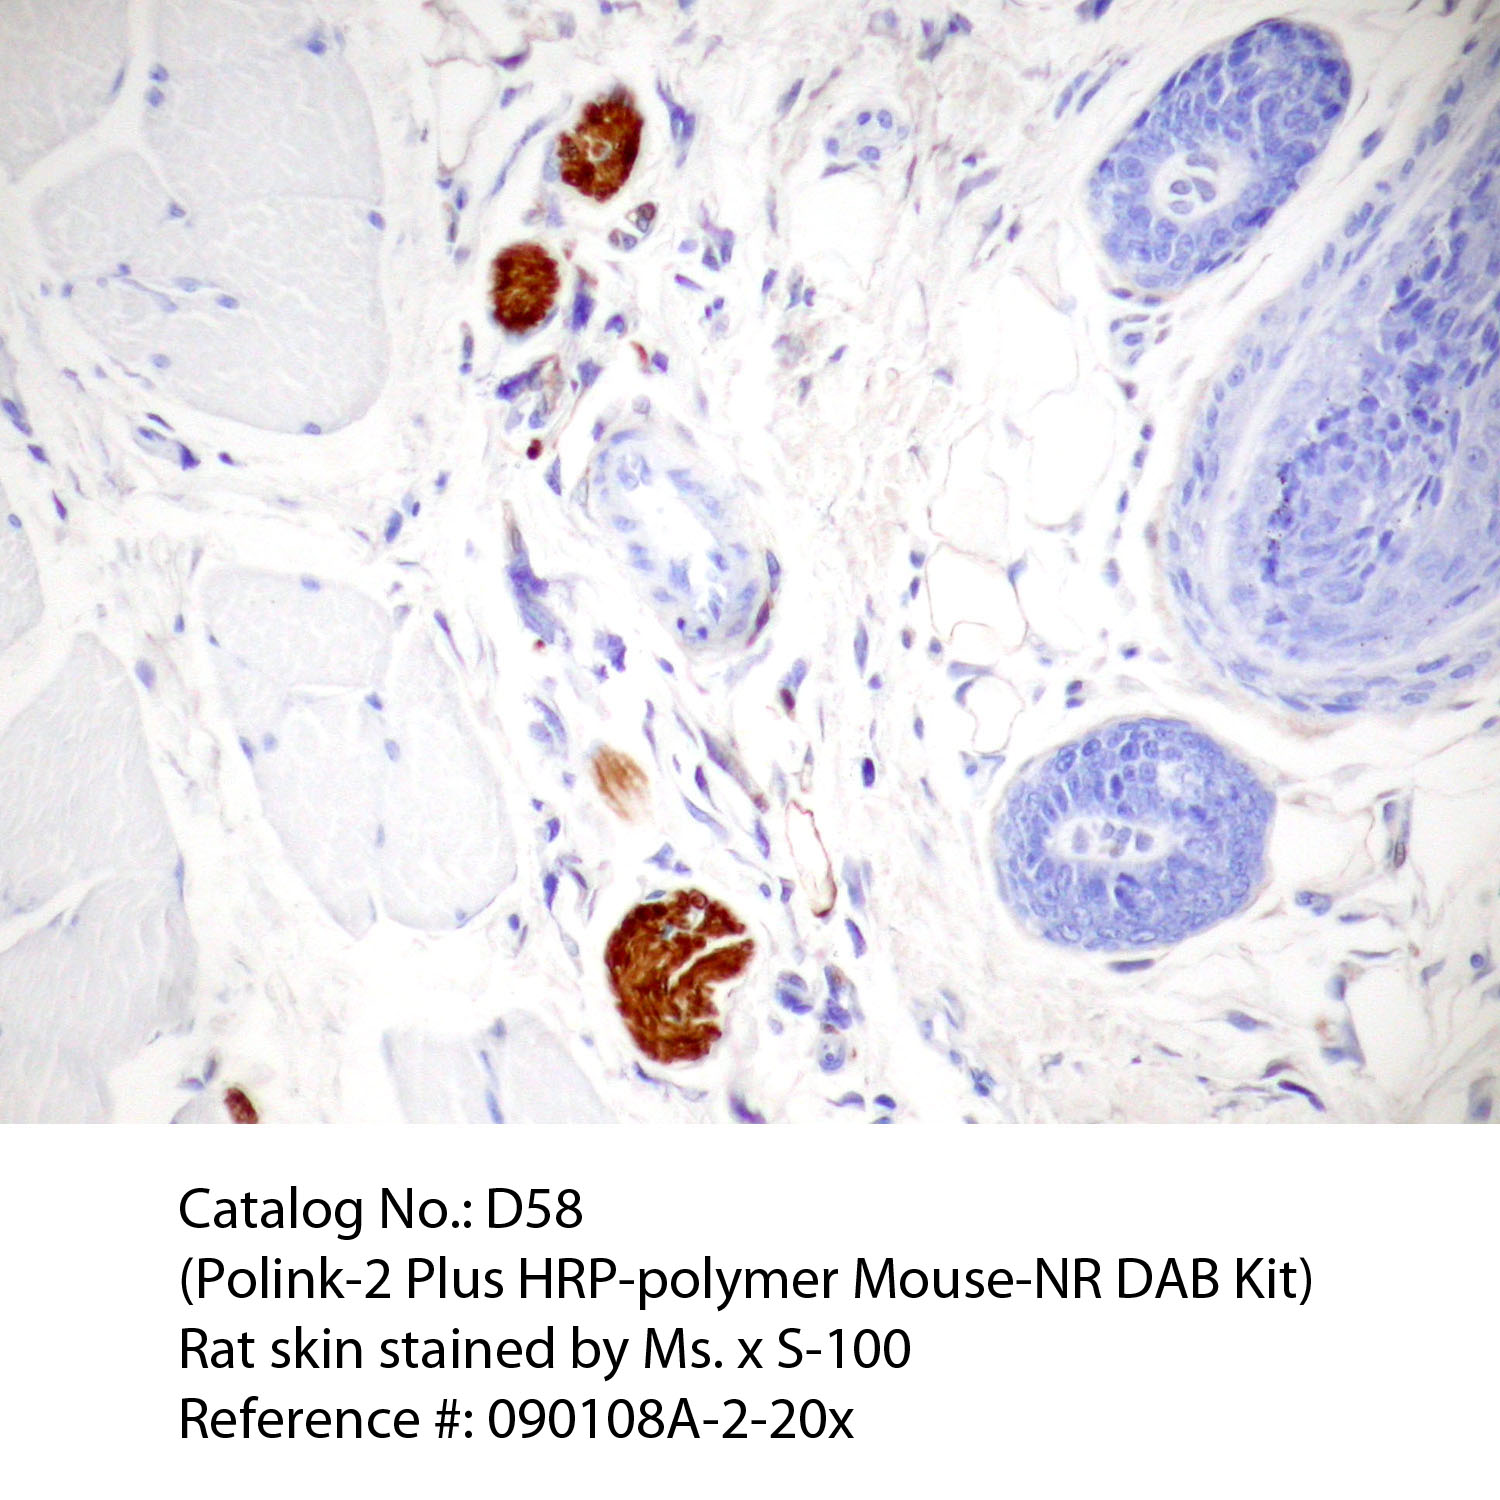 IHC staining of FFPE rat skin tissue within normal limits using mouse anti-S-100 polyclonal antibody and Polink-2 Plus HRP Mouse-NR for DAB detection kit [D58-18]. The brown stain indicates positive stain and blue is the counter stain. It is mounted using a permanent organic mounting medium [E37-100].